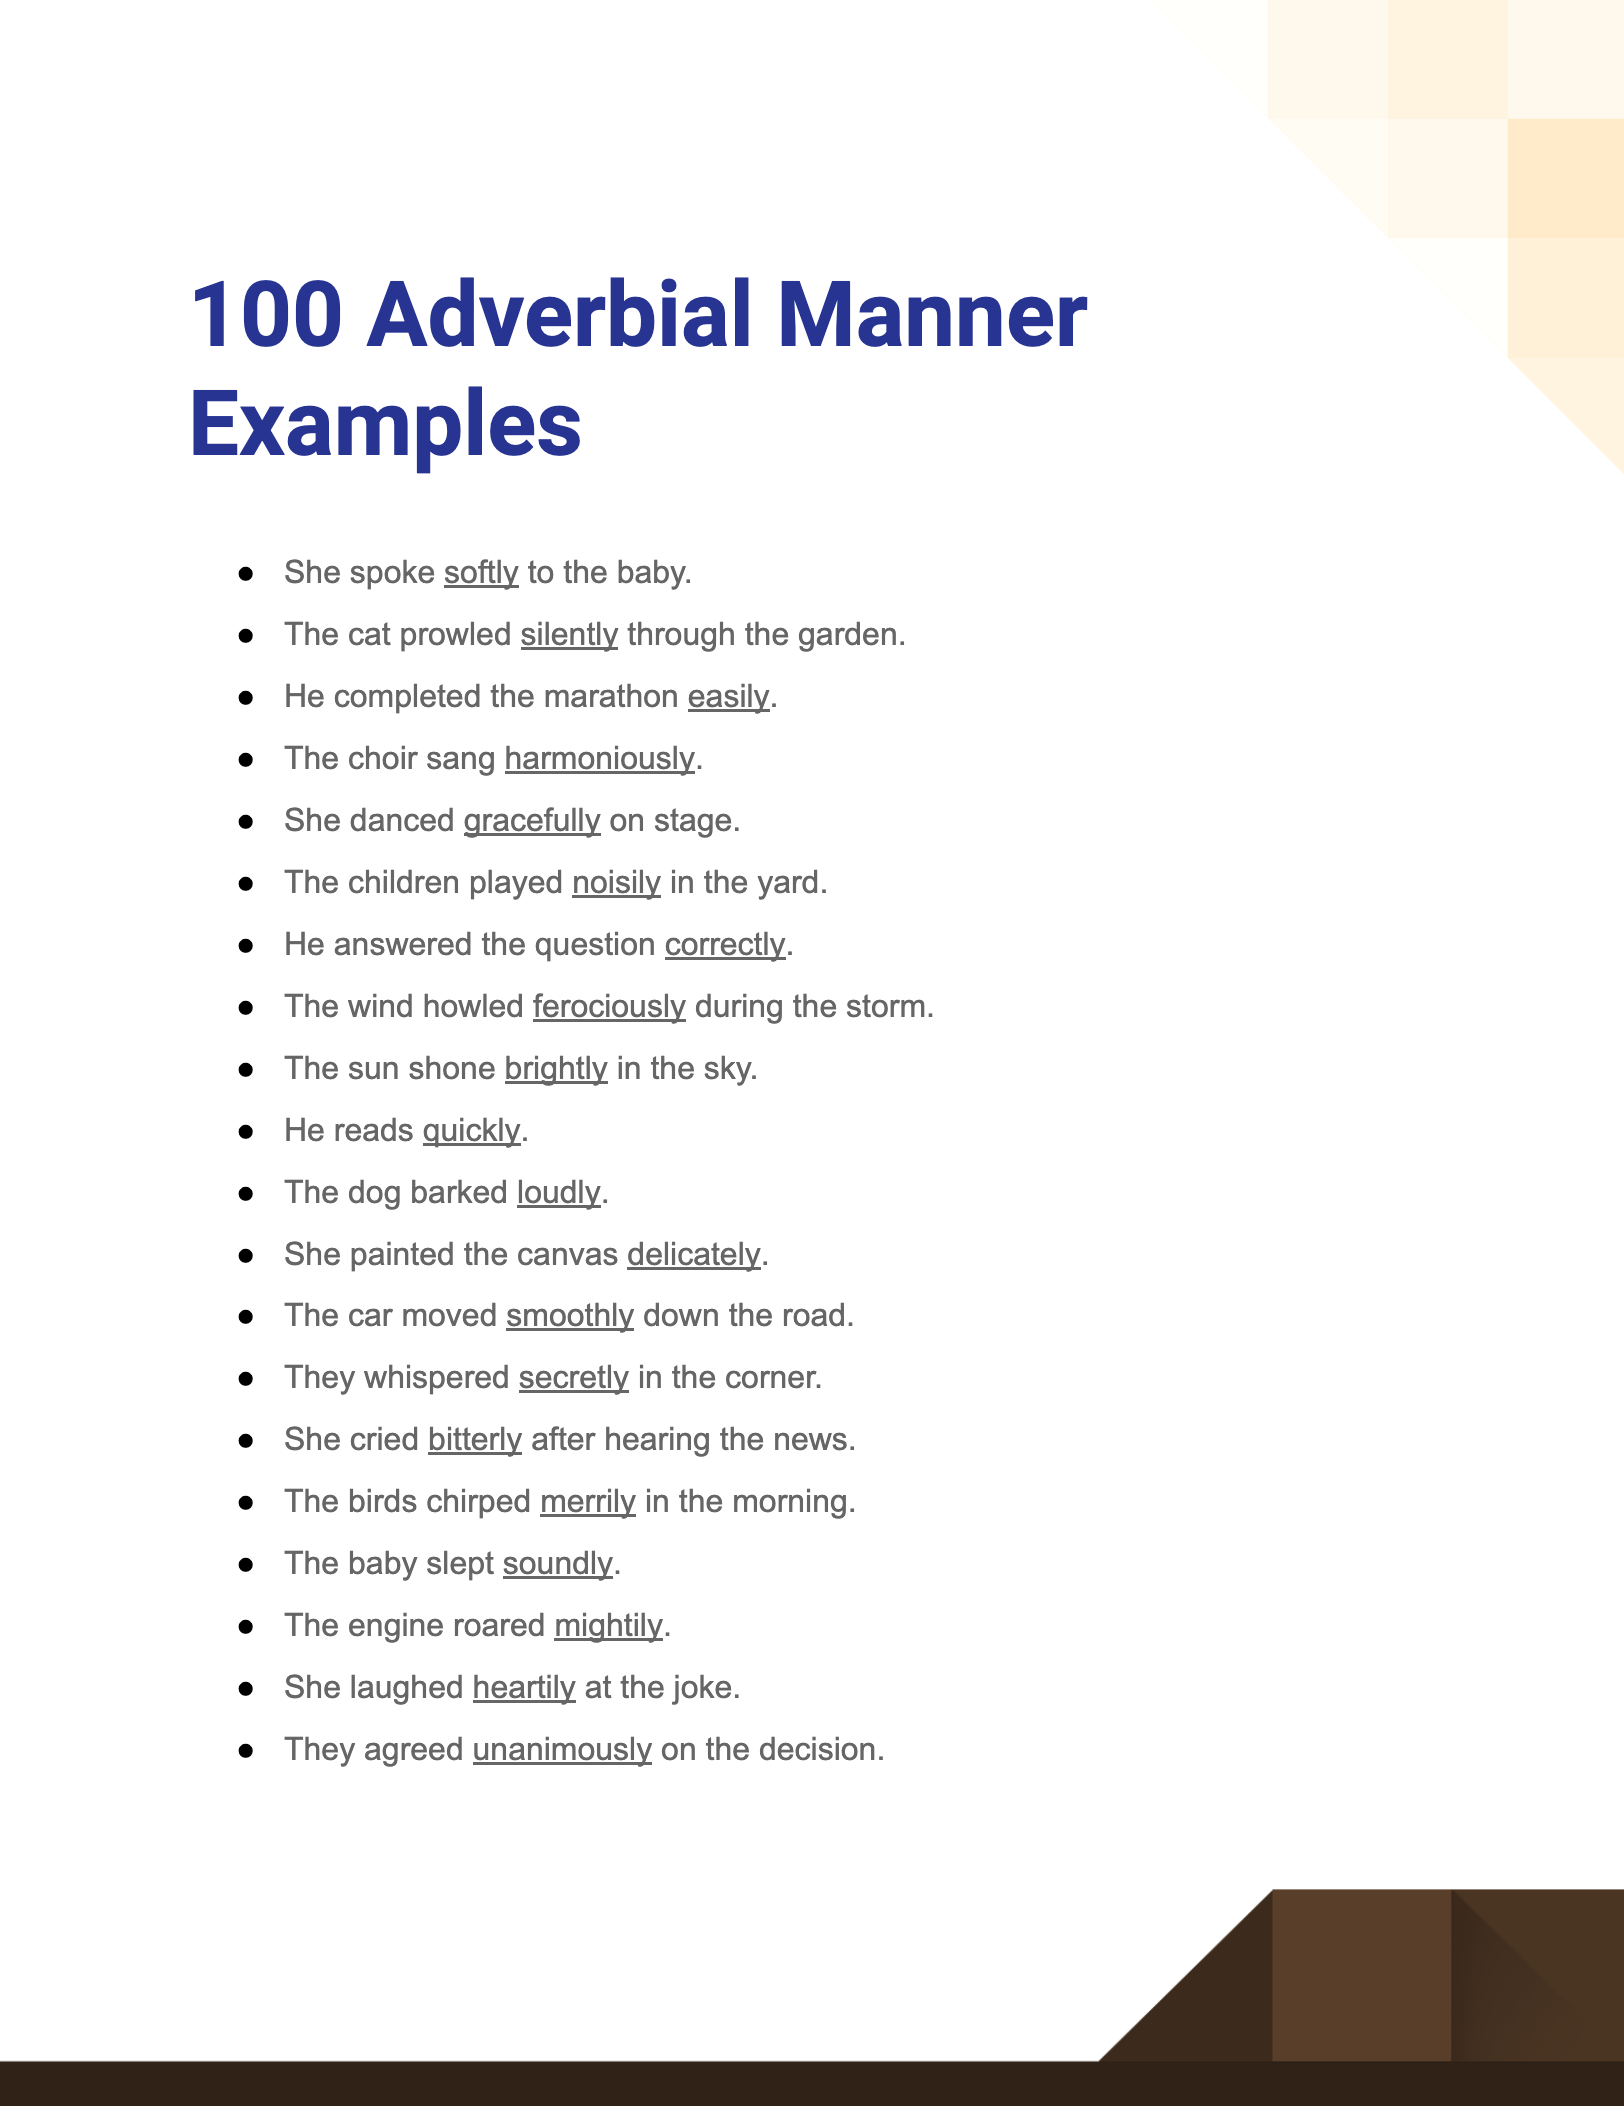 adverbial manner examples1